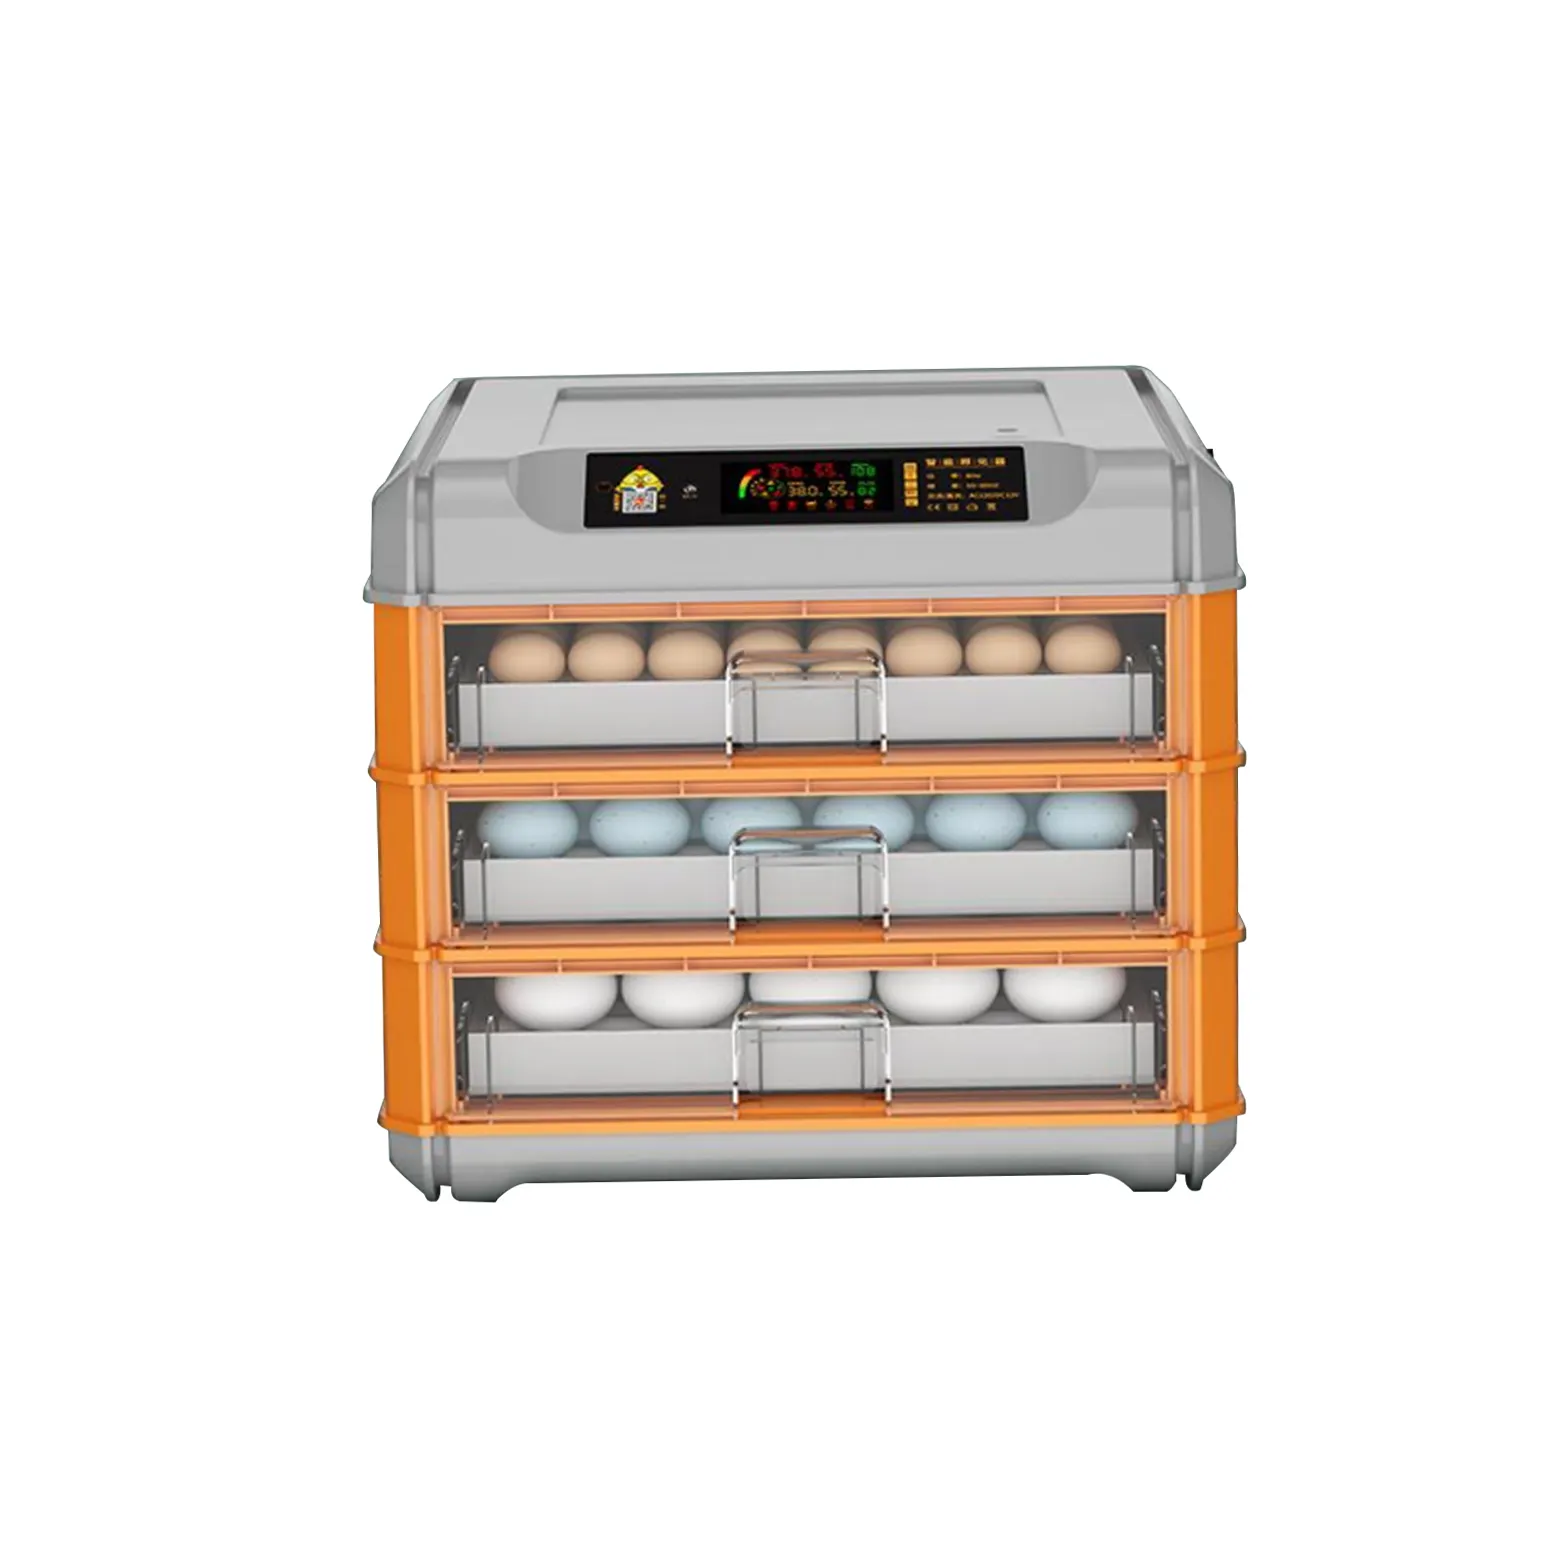 384 Incubations Automatic High Quality Chicken Egg Incubator Hatching Machine Factory Direct Supply